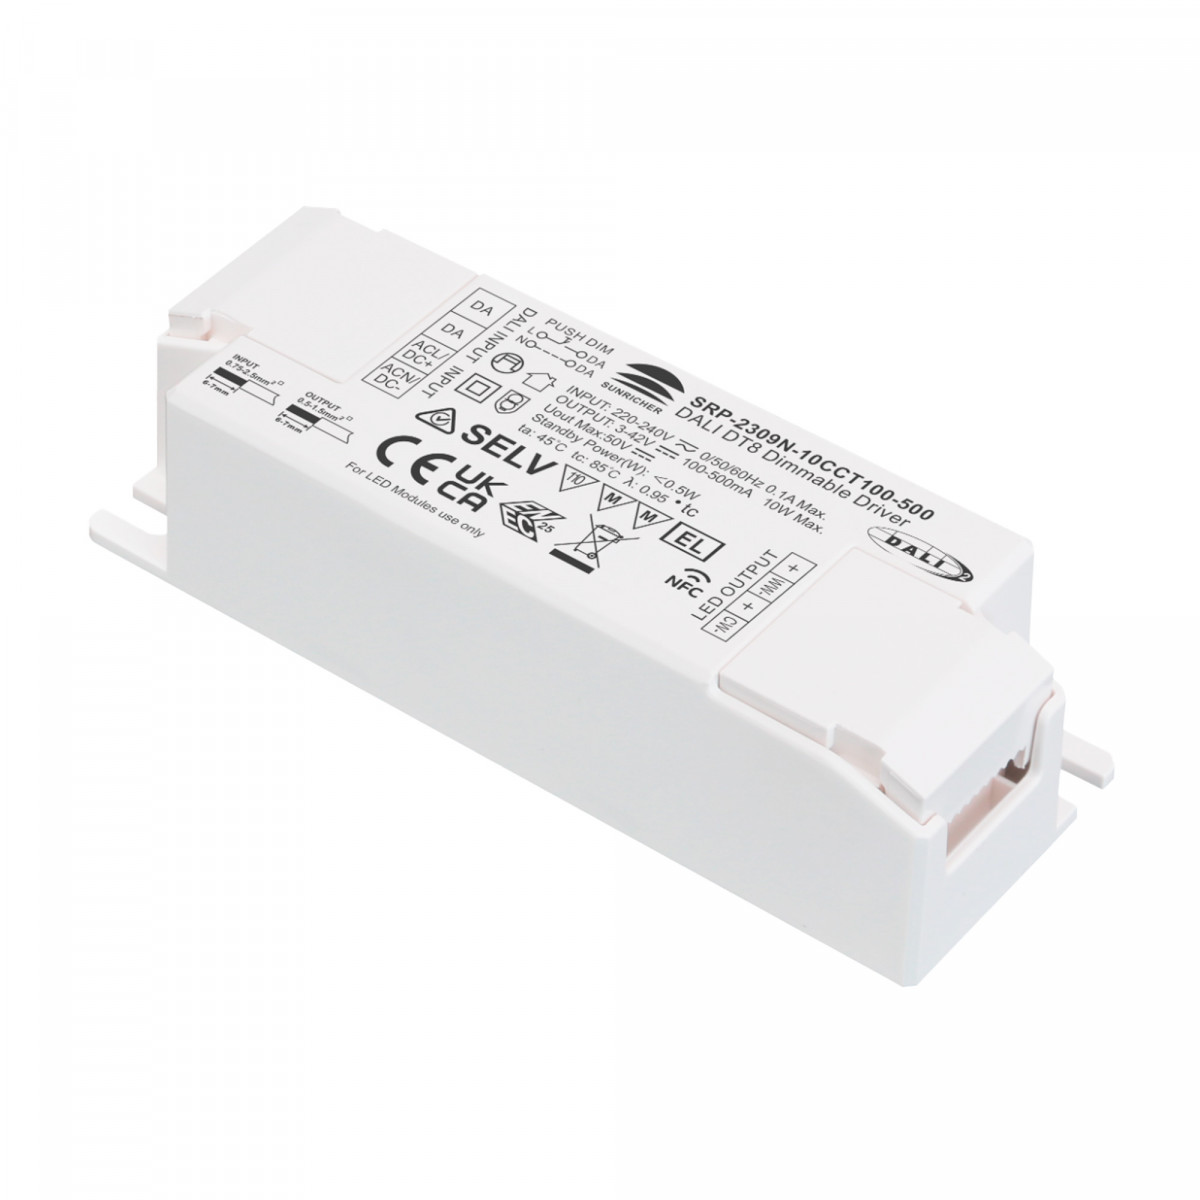 DALI dimmable DT8 CCT driver 220-240V - Output 3-42V DC - 100-500mA - 10W